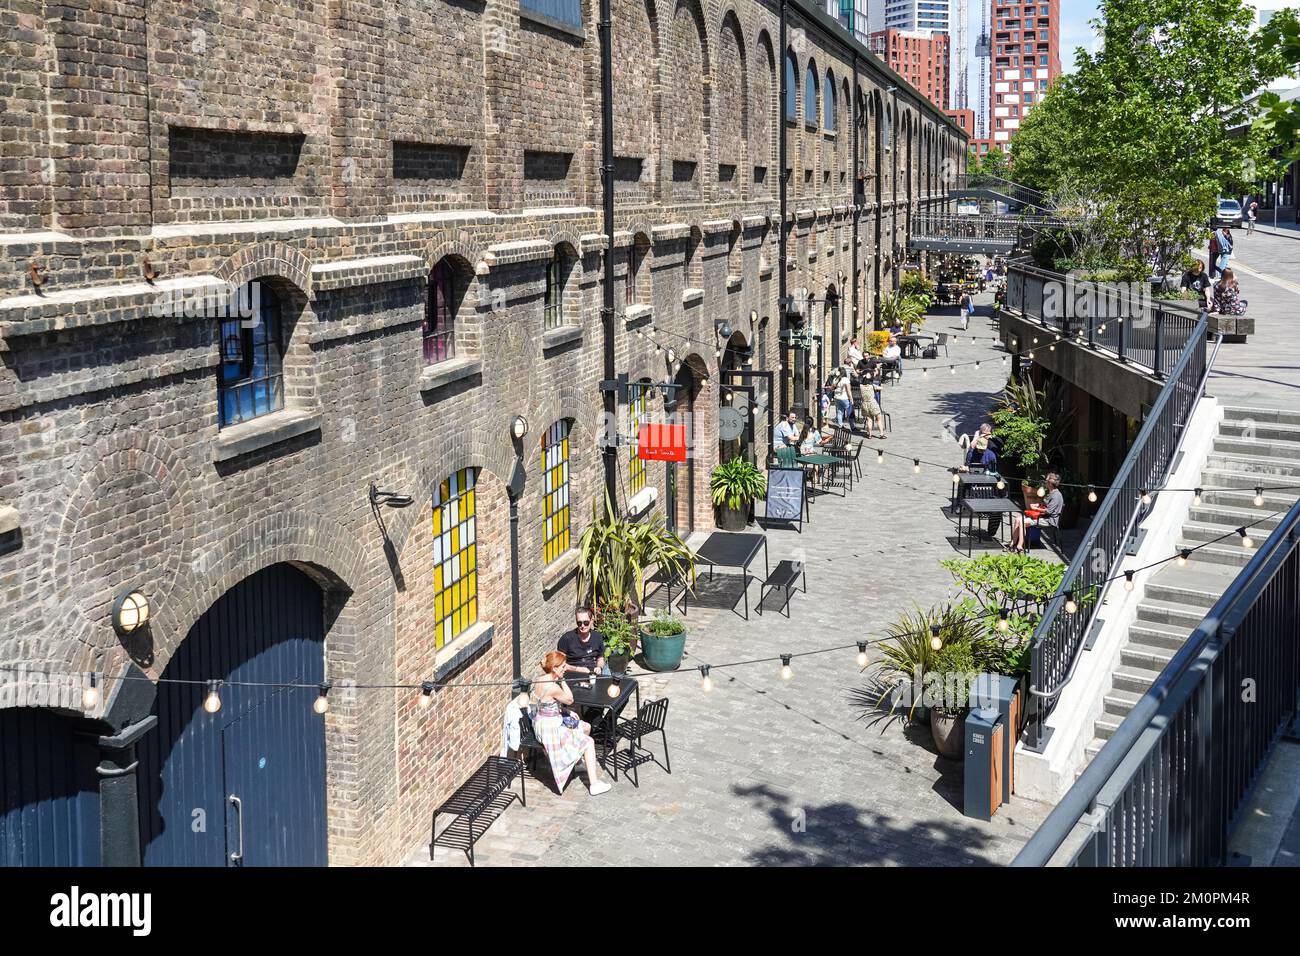 Cafes and restaurants at Lower Stable Street, Coal Drops Yard at King's Cross, London England United Kingdom UK Stock Photo